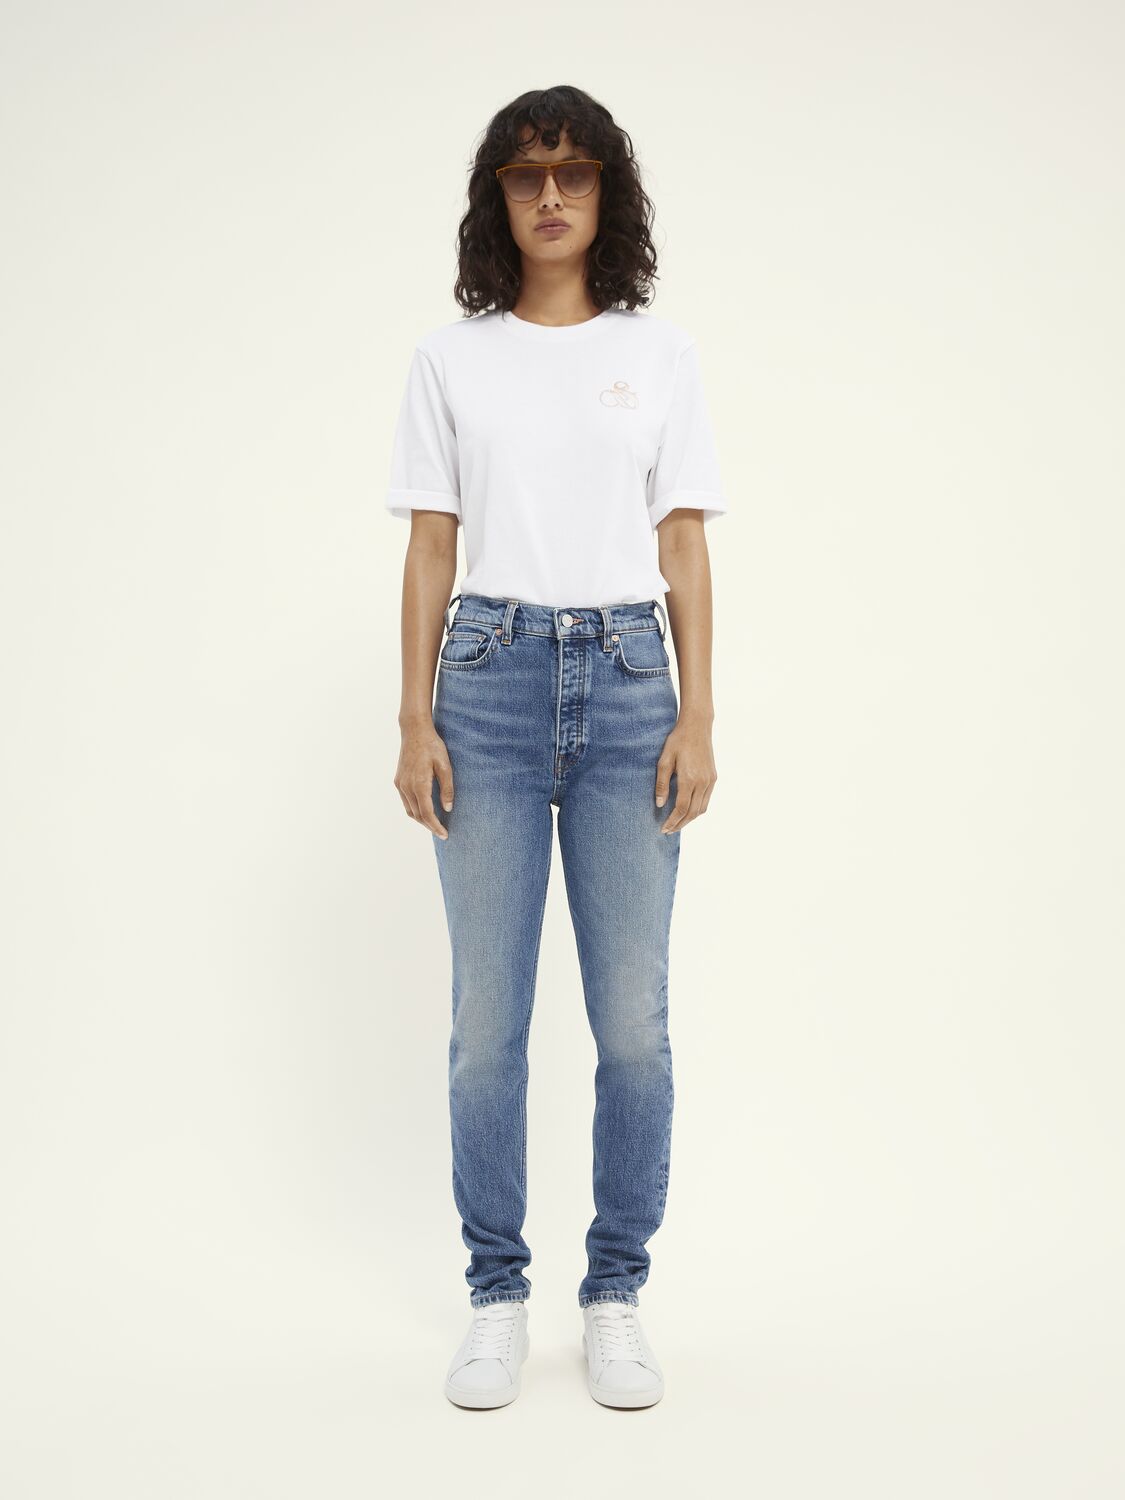 Scotch & Soda Relaxed Fit T Shirt White